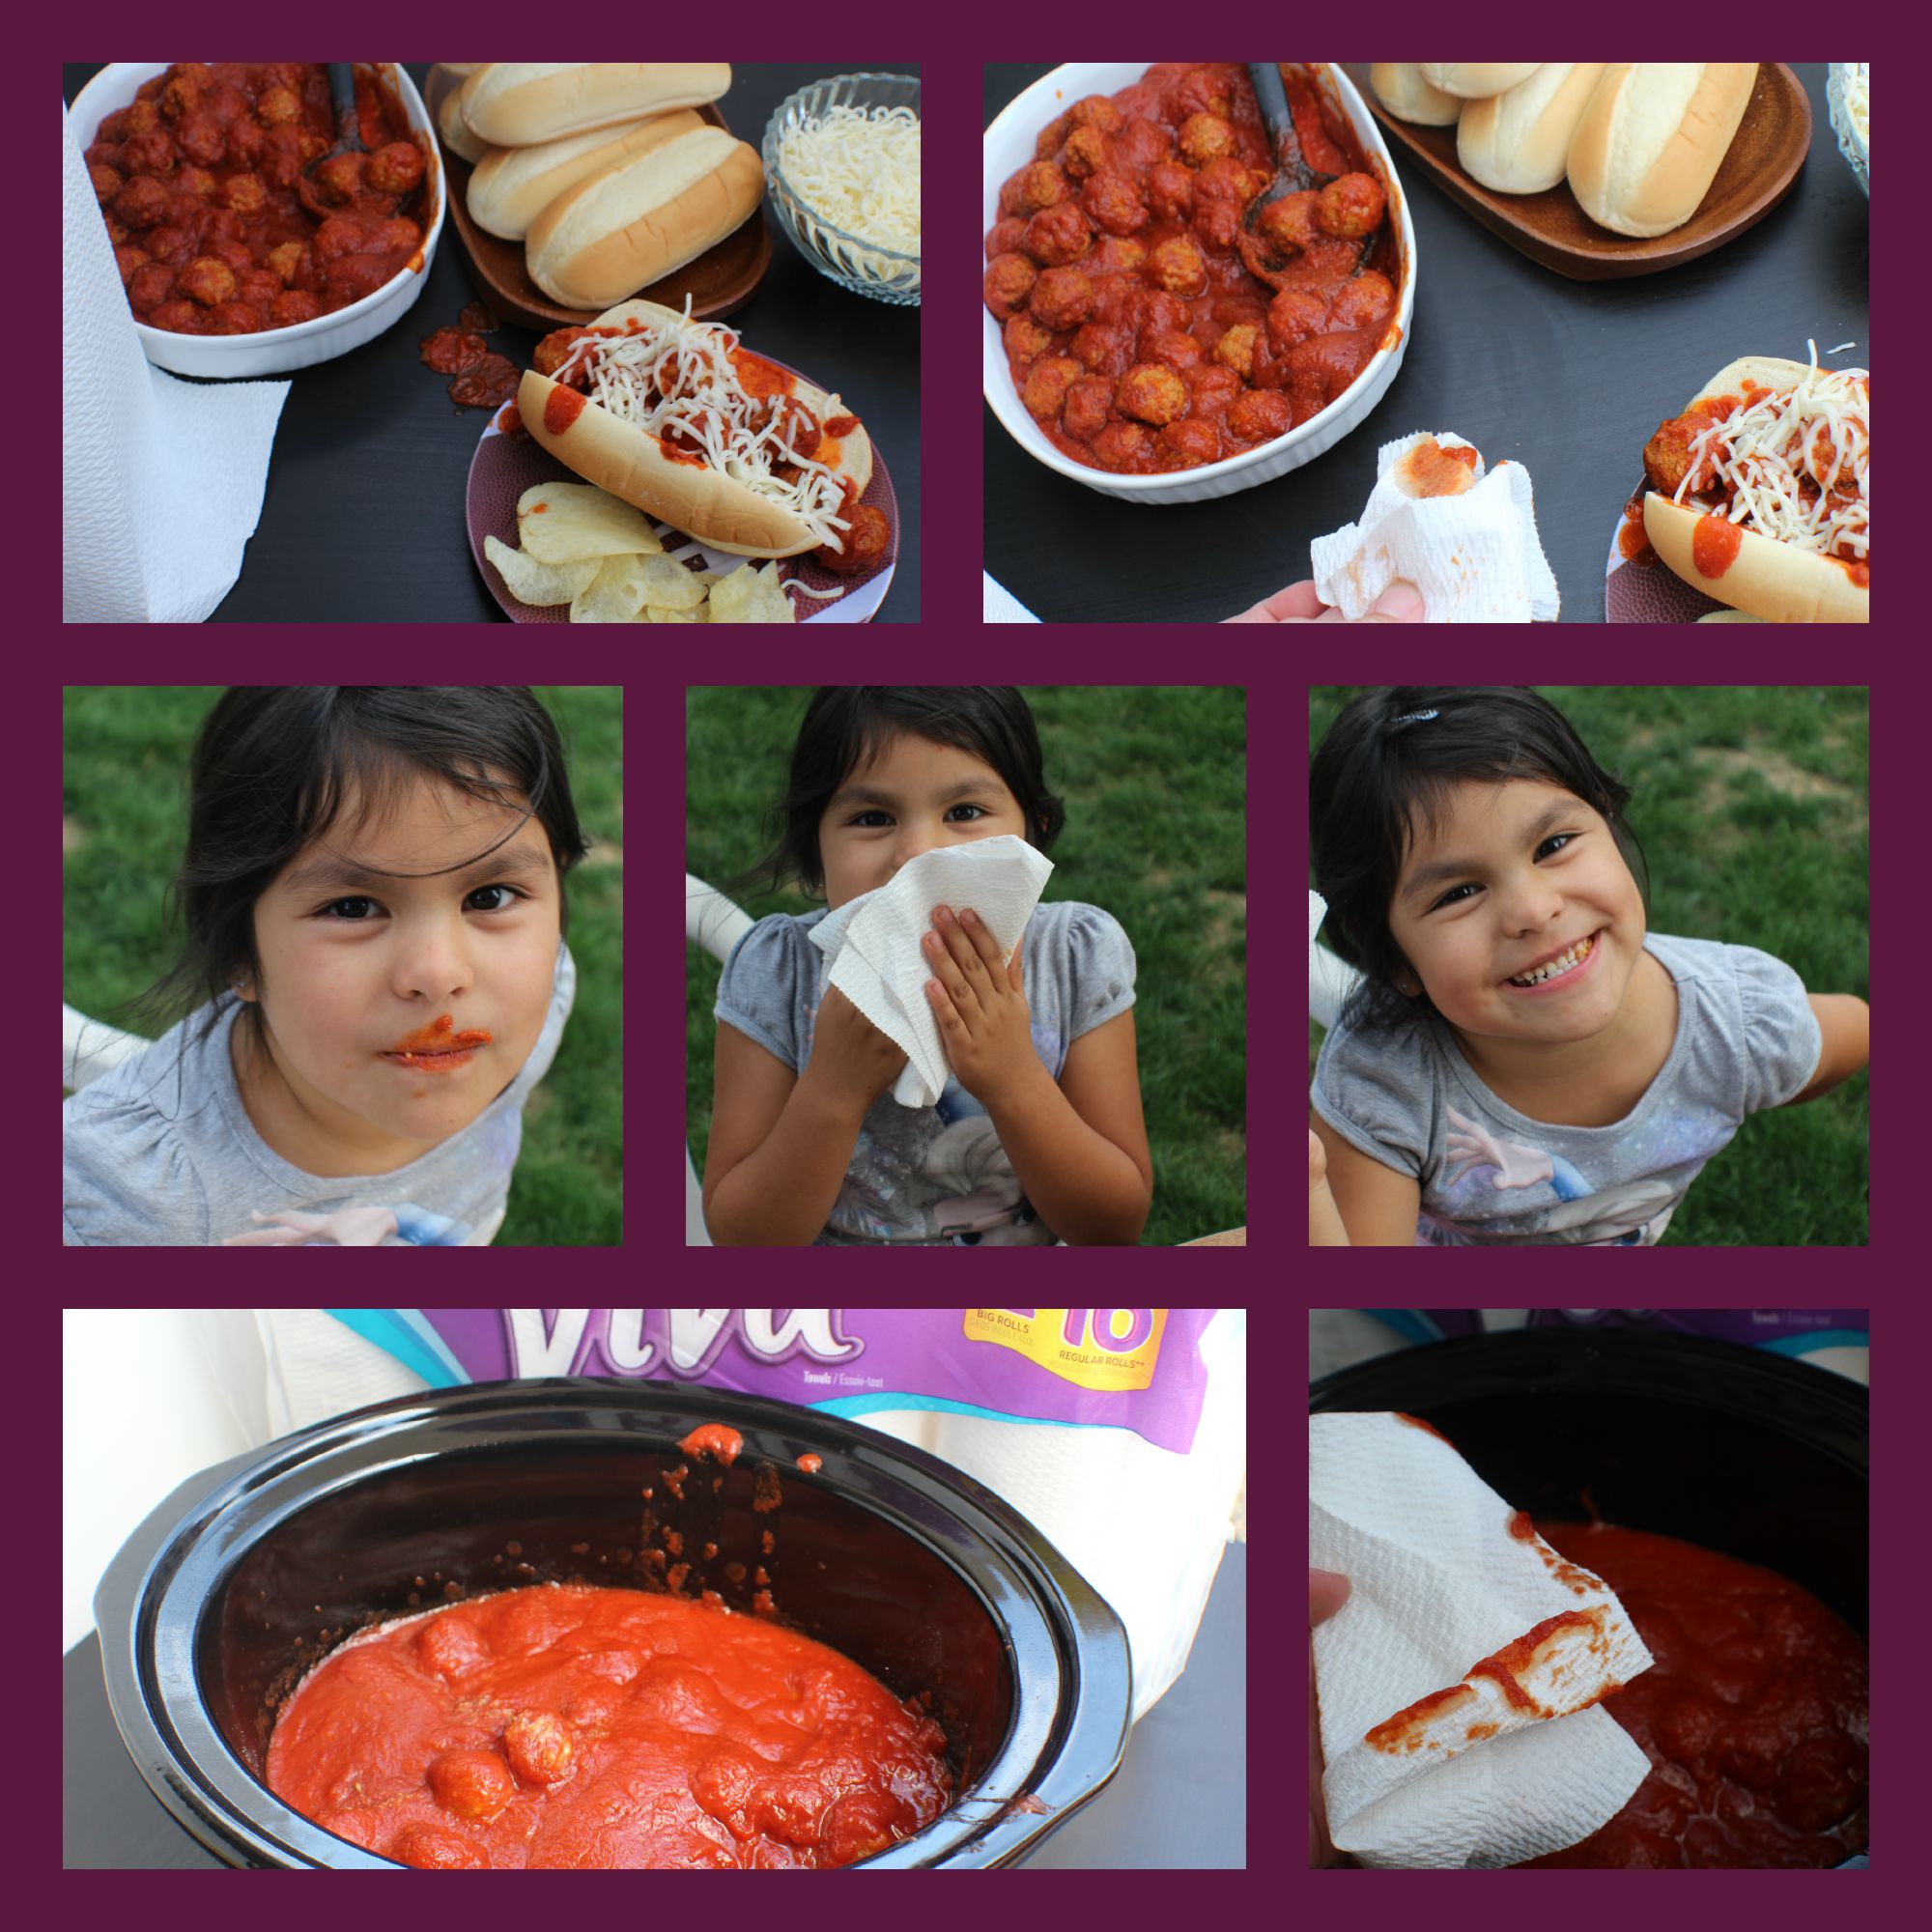 These Crock Pot Meatball Subs are a great tailgating recipe! Plus they are a huge hit with the kids as well super easy to make.